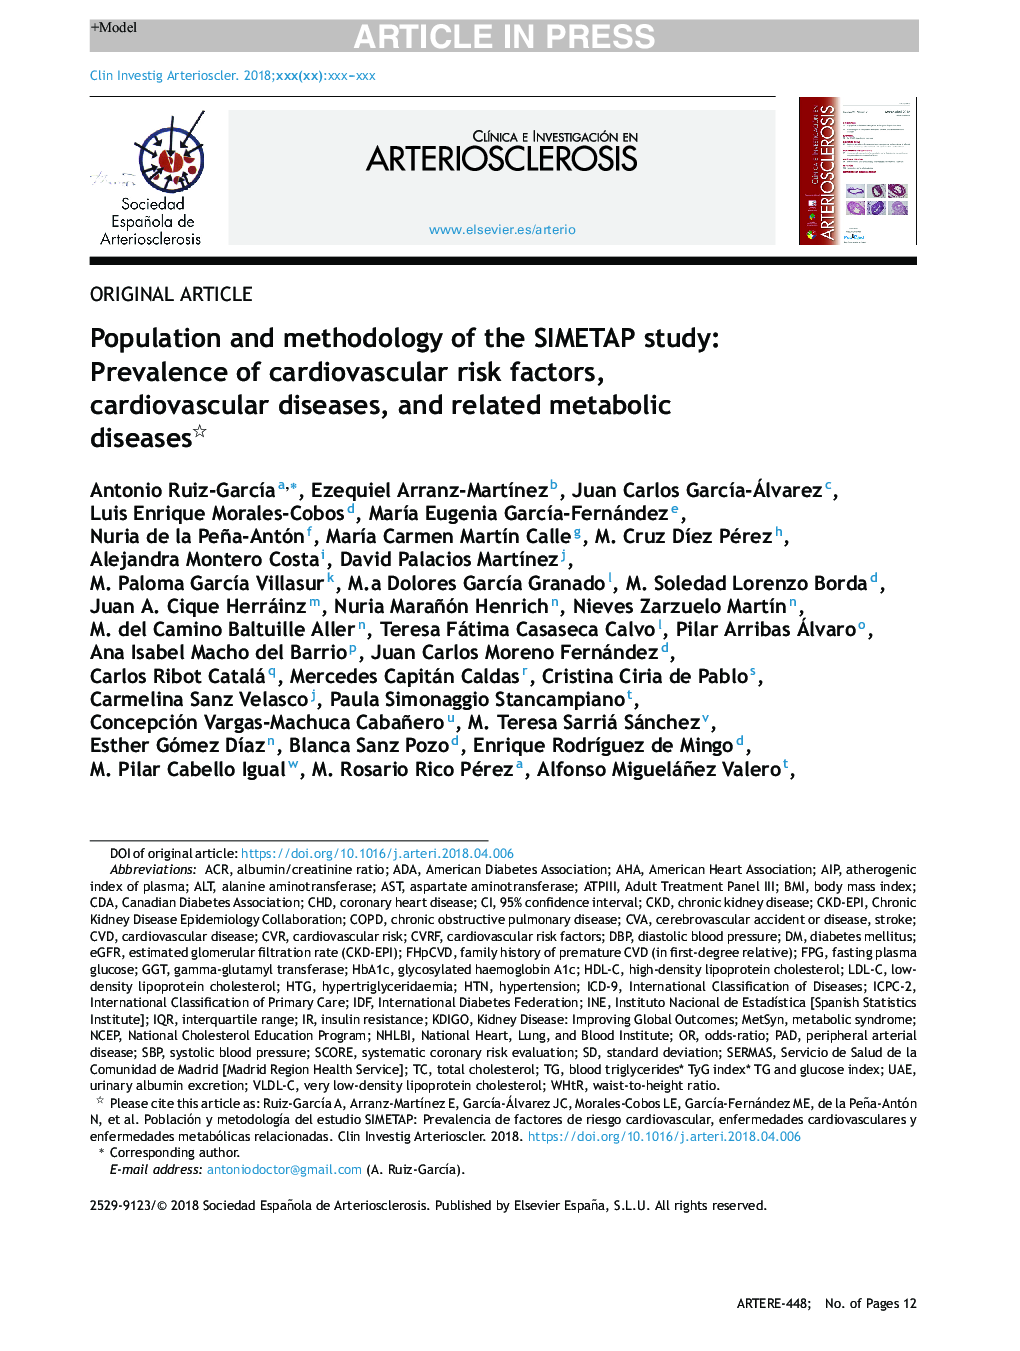 Population and methodology of the SIMETAP study: Prevalence of cardiovascular risk factors, cardiovascular diseases, and related metabolic diseases